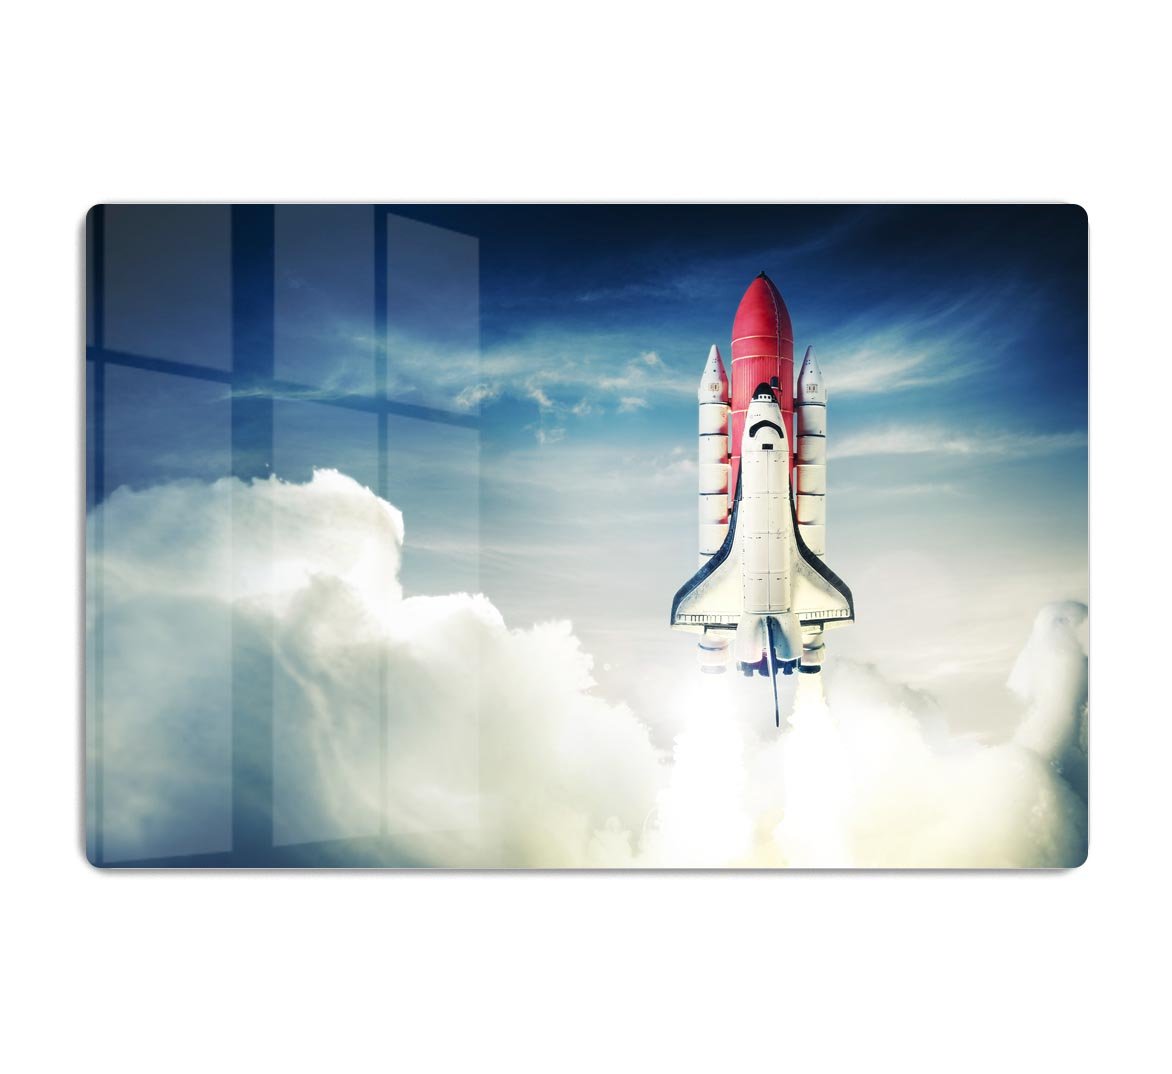 Space shuttle taking off on a mission HD Metal Print